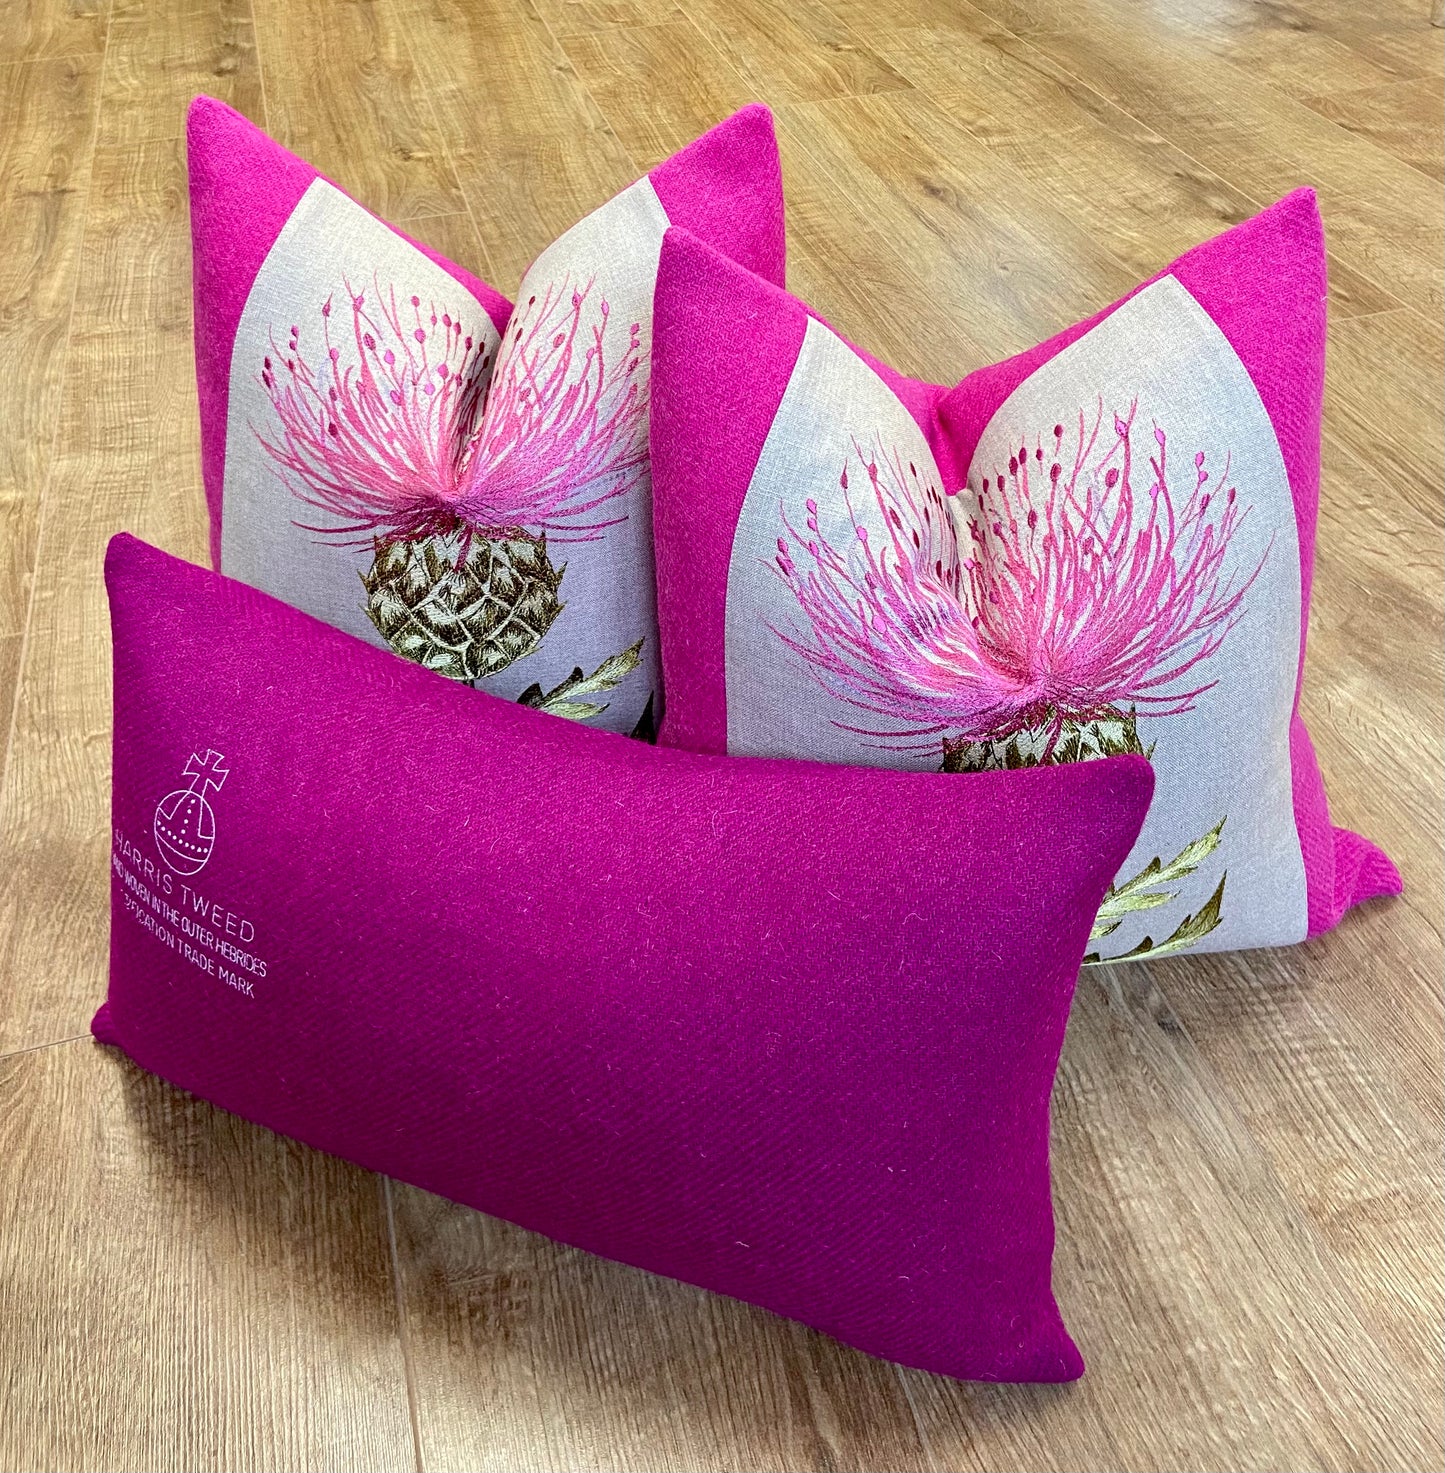 Vibrant Pink Embroidered Thistle and Harris Tweed Cushion 18”